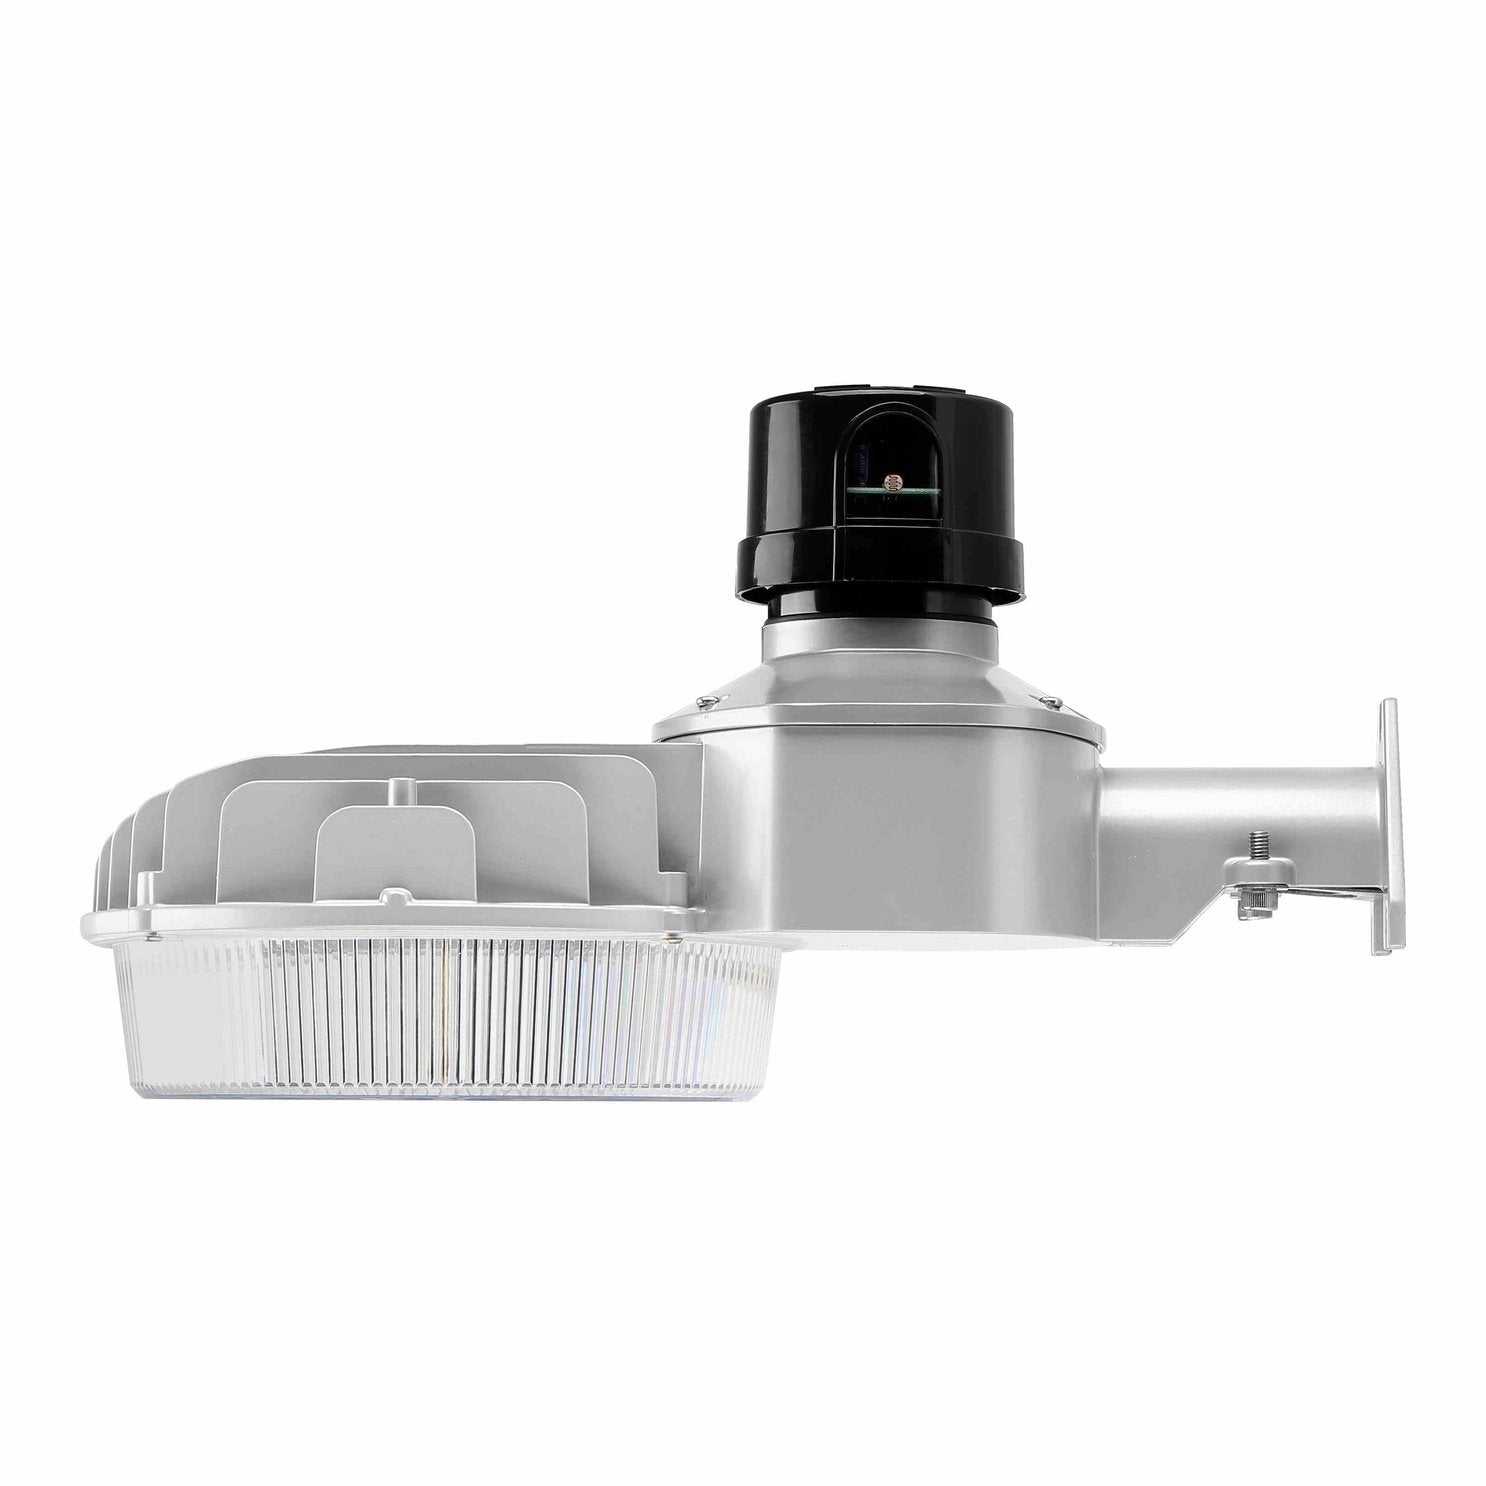 MDD05 LED Dusk to Dawn Barn Light with Photocell 90W, 12200LM, 120-277VAC, 5000K, Silver Gray